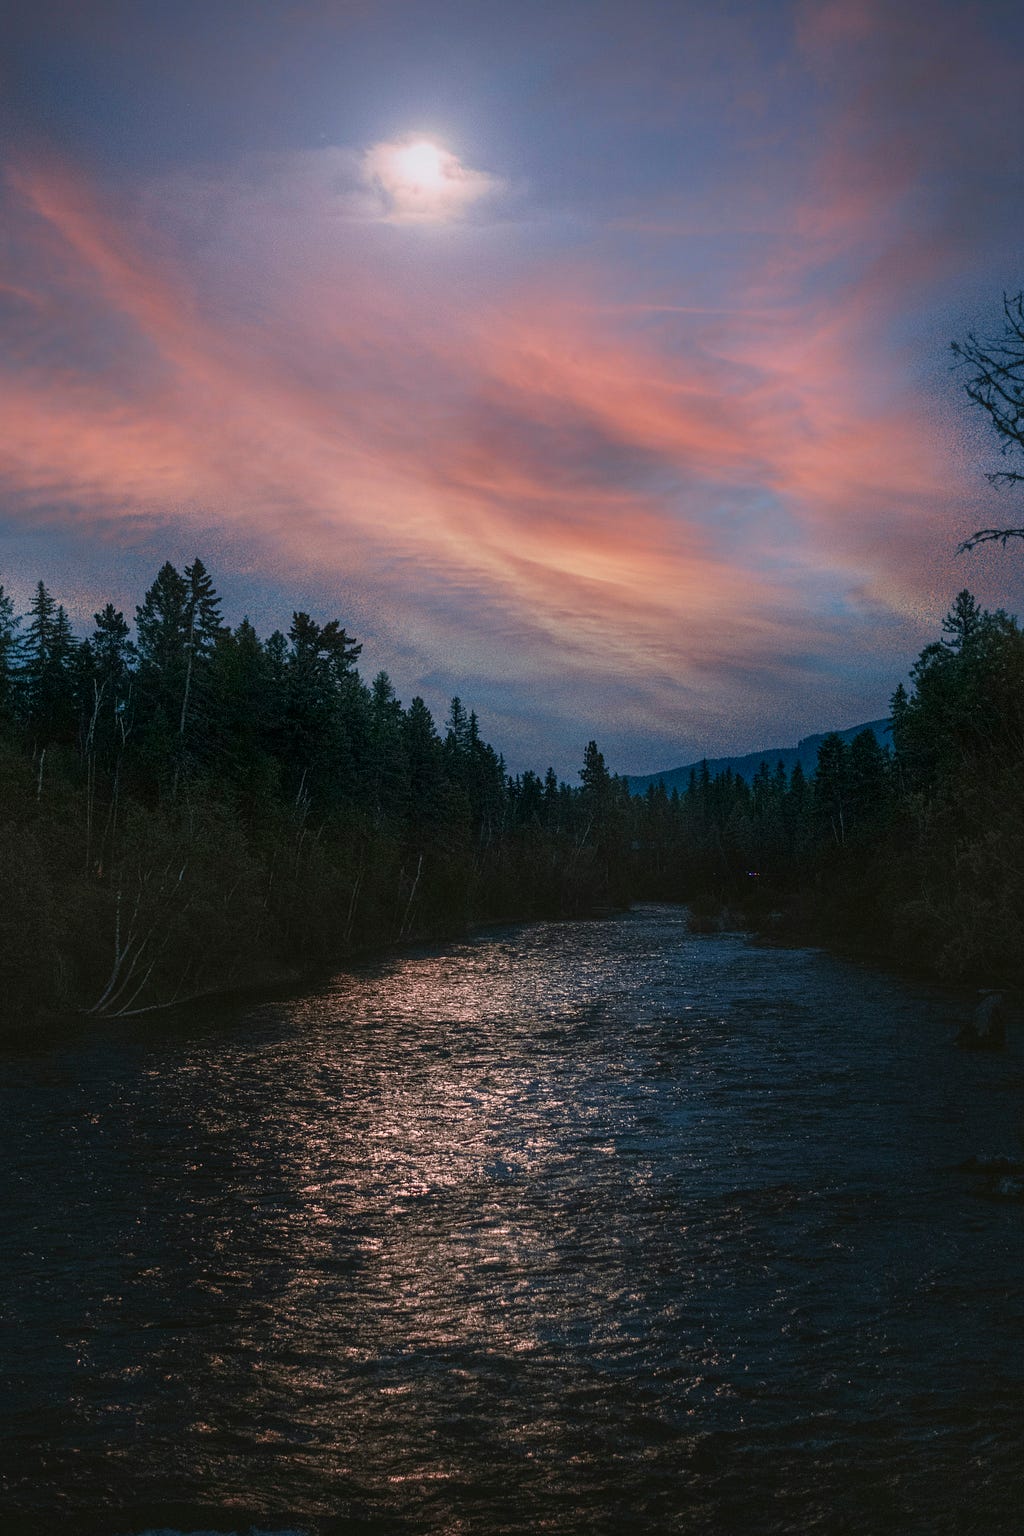 In the center is a river rushing, lots of ripples. Trees line each side of it tall trees with robust foliage. The moon is full and is shining through wispy sunset clouds and reflecting on the river. The clouds are pink with dark blue sky behind.